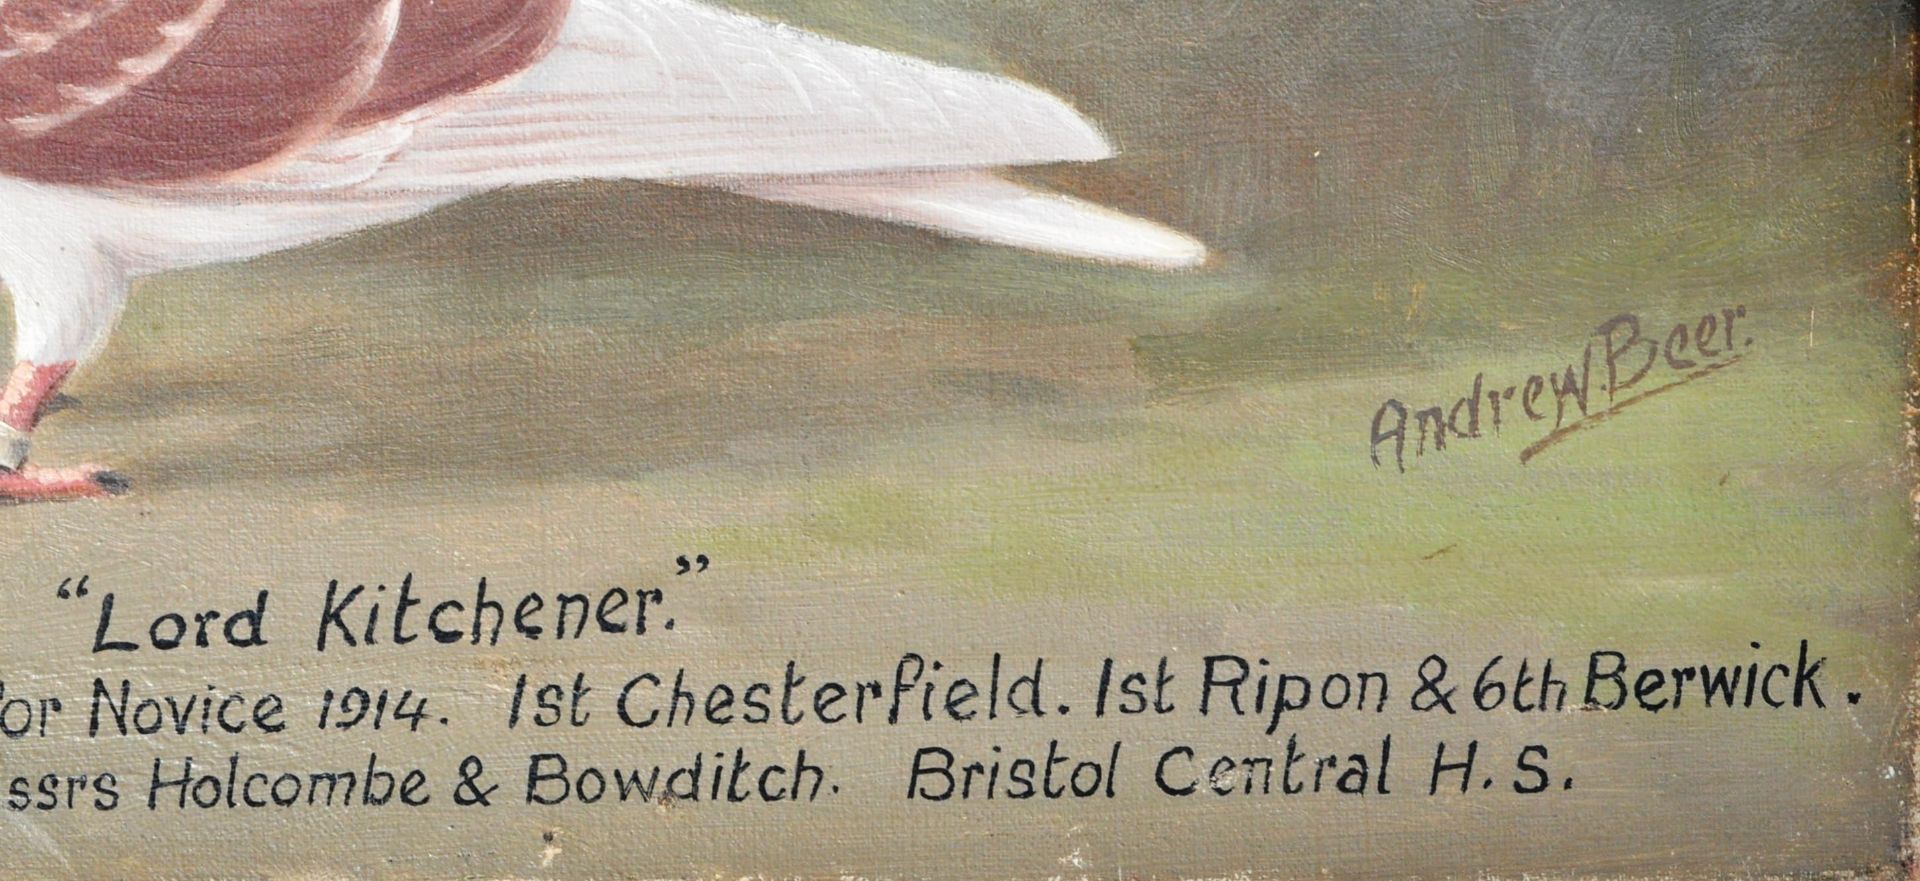 ANDREW BEER - LORD KITCHENER - OIL ON CANVAS RACING PIGEON PAINTING - Image 9 of 11